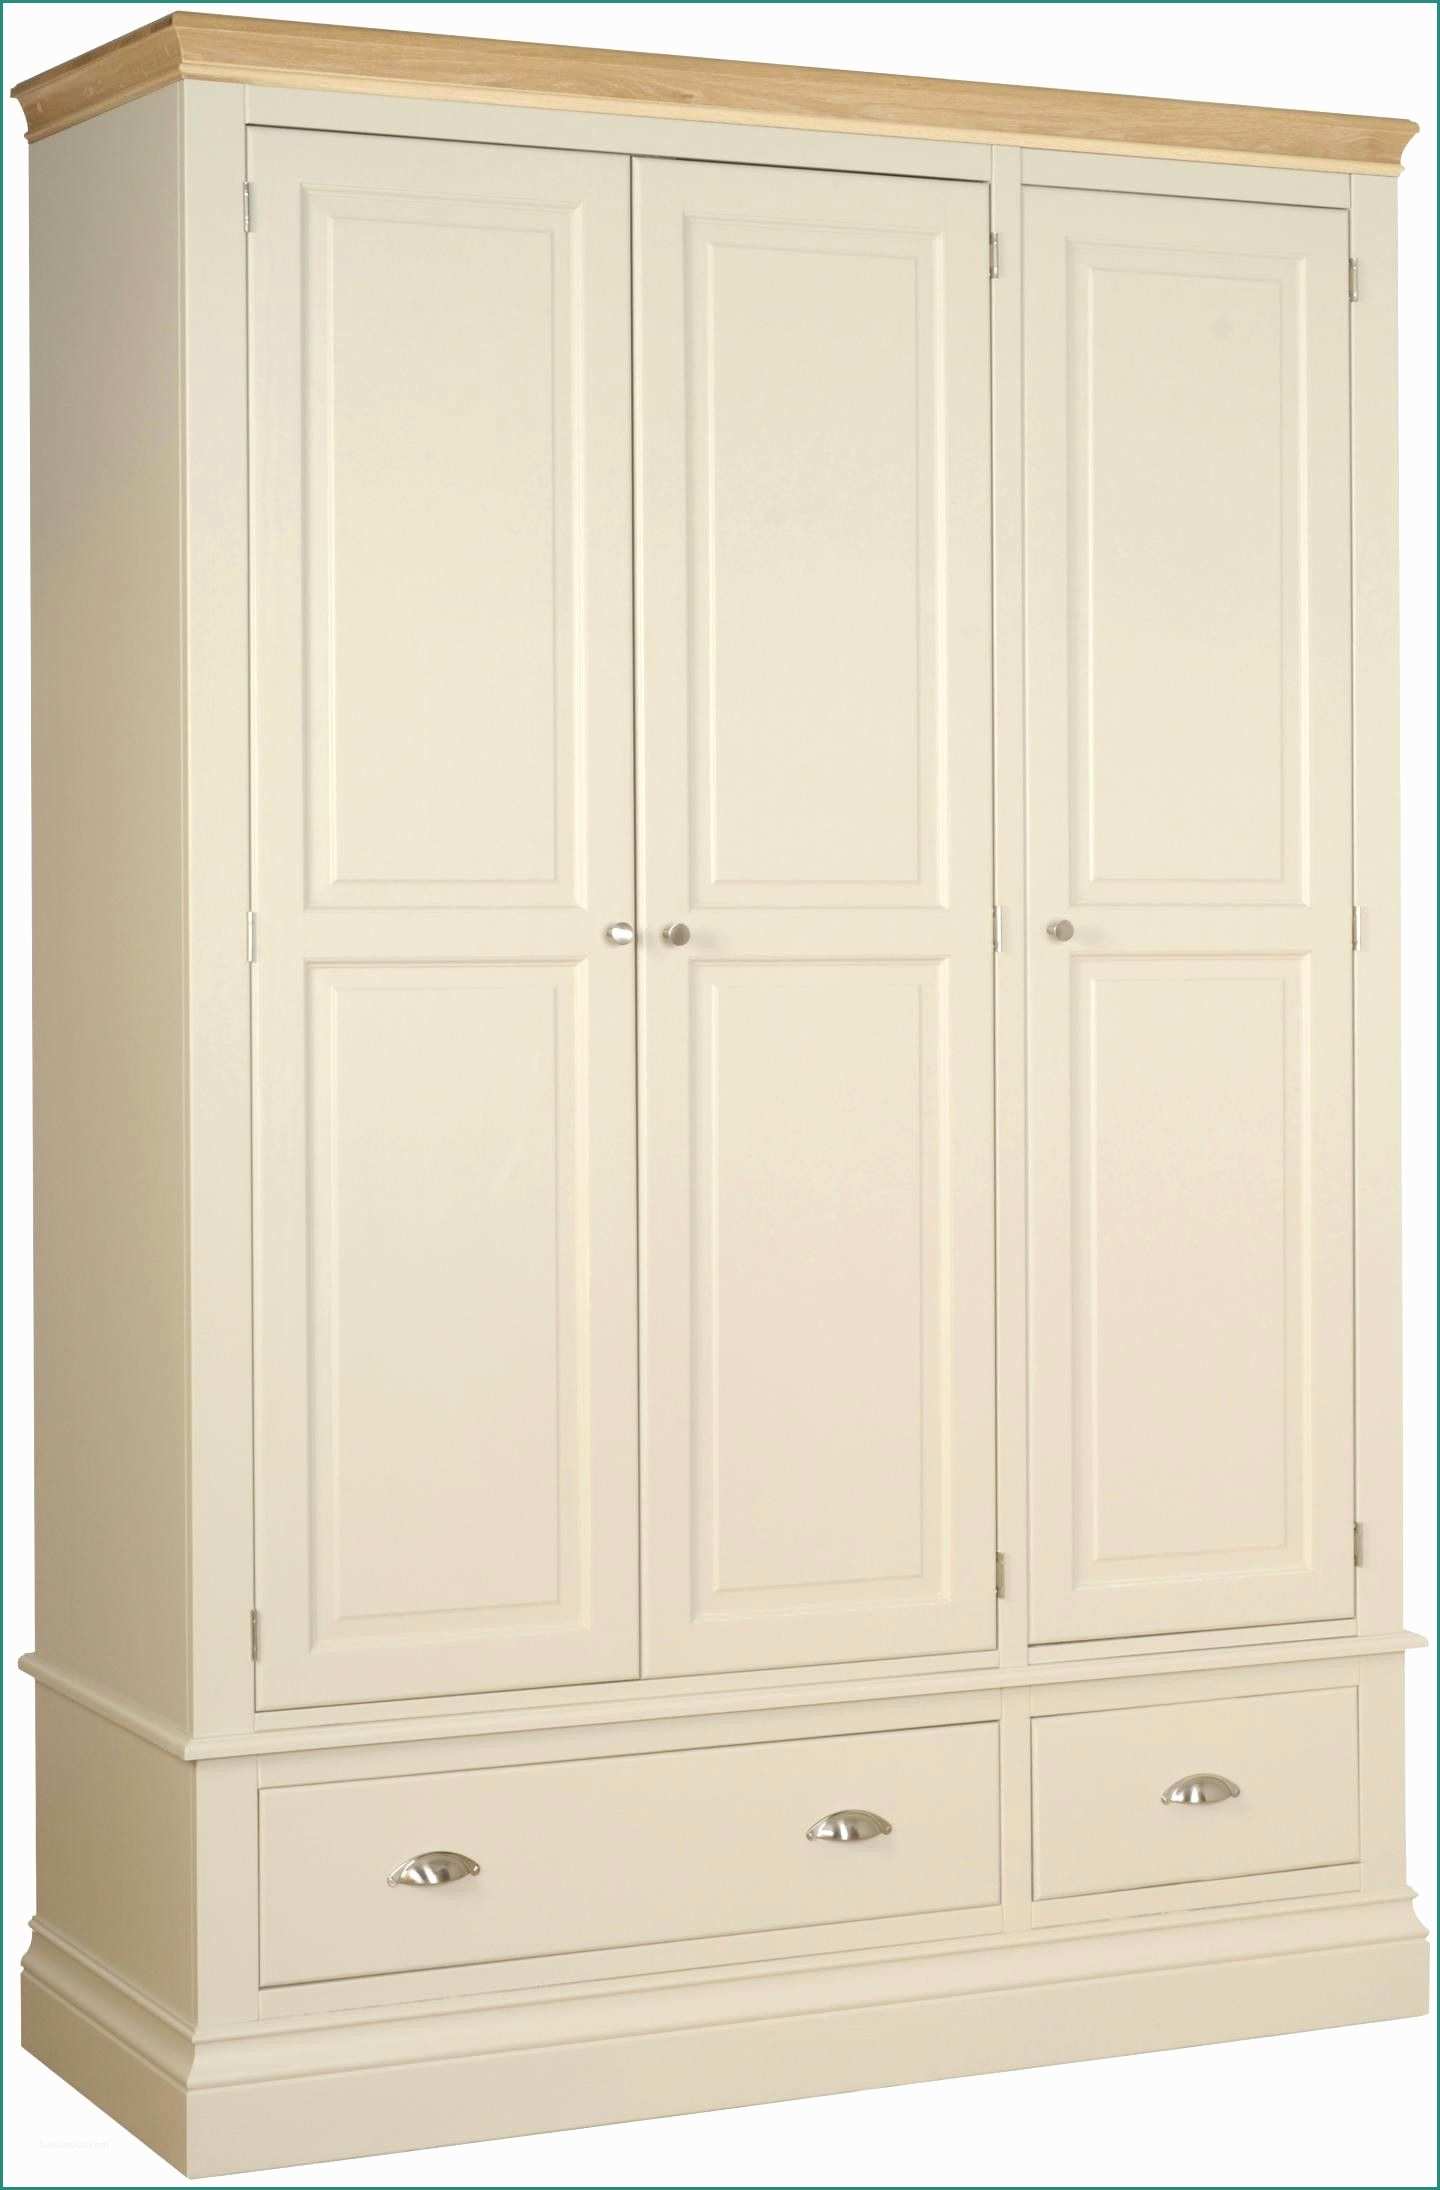 Letto Con Cassetti E Emily Triple Hanging Wardrobe with 2 Drawers Painted Ivory